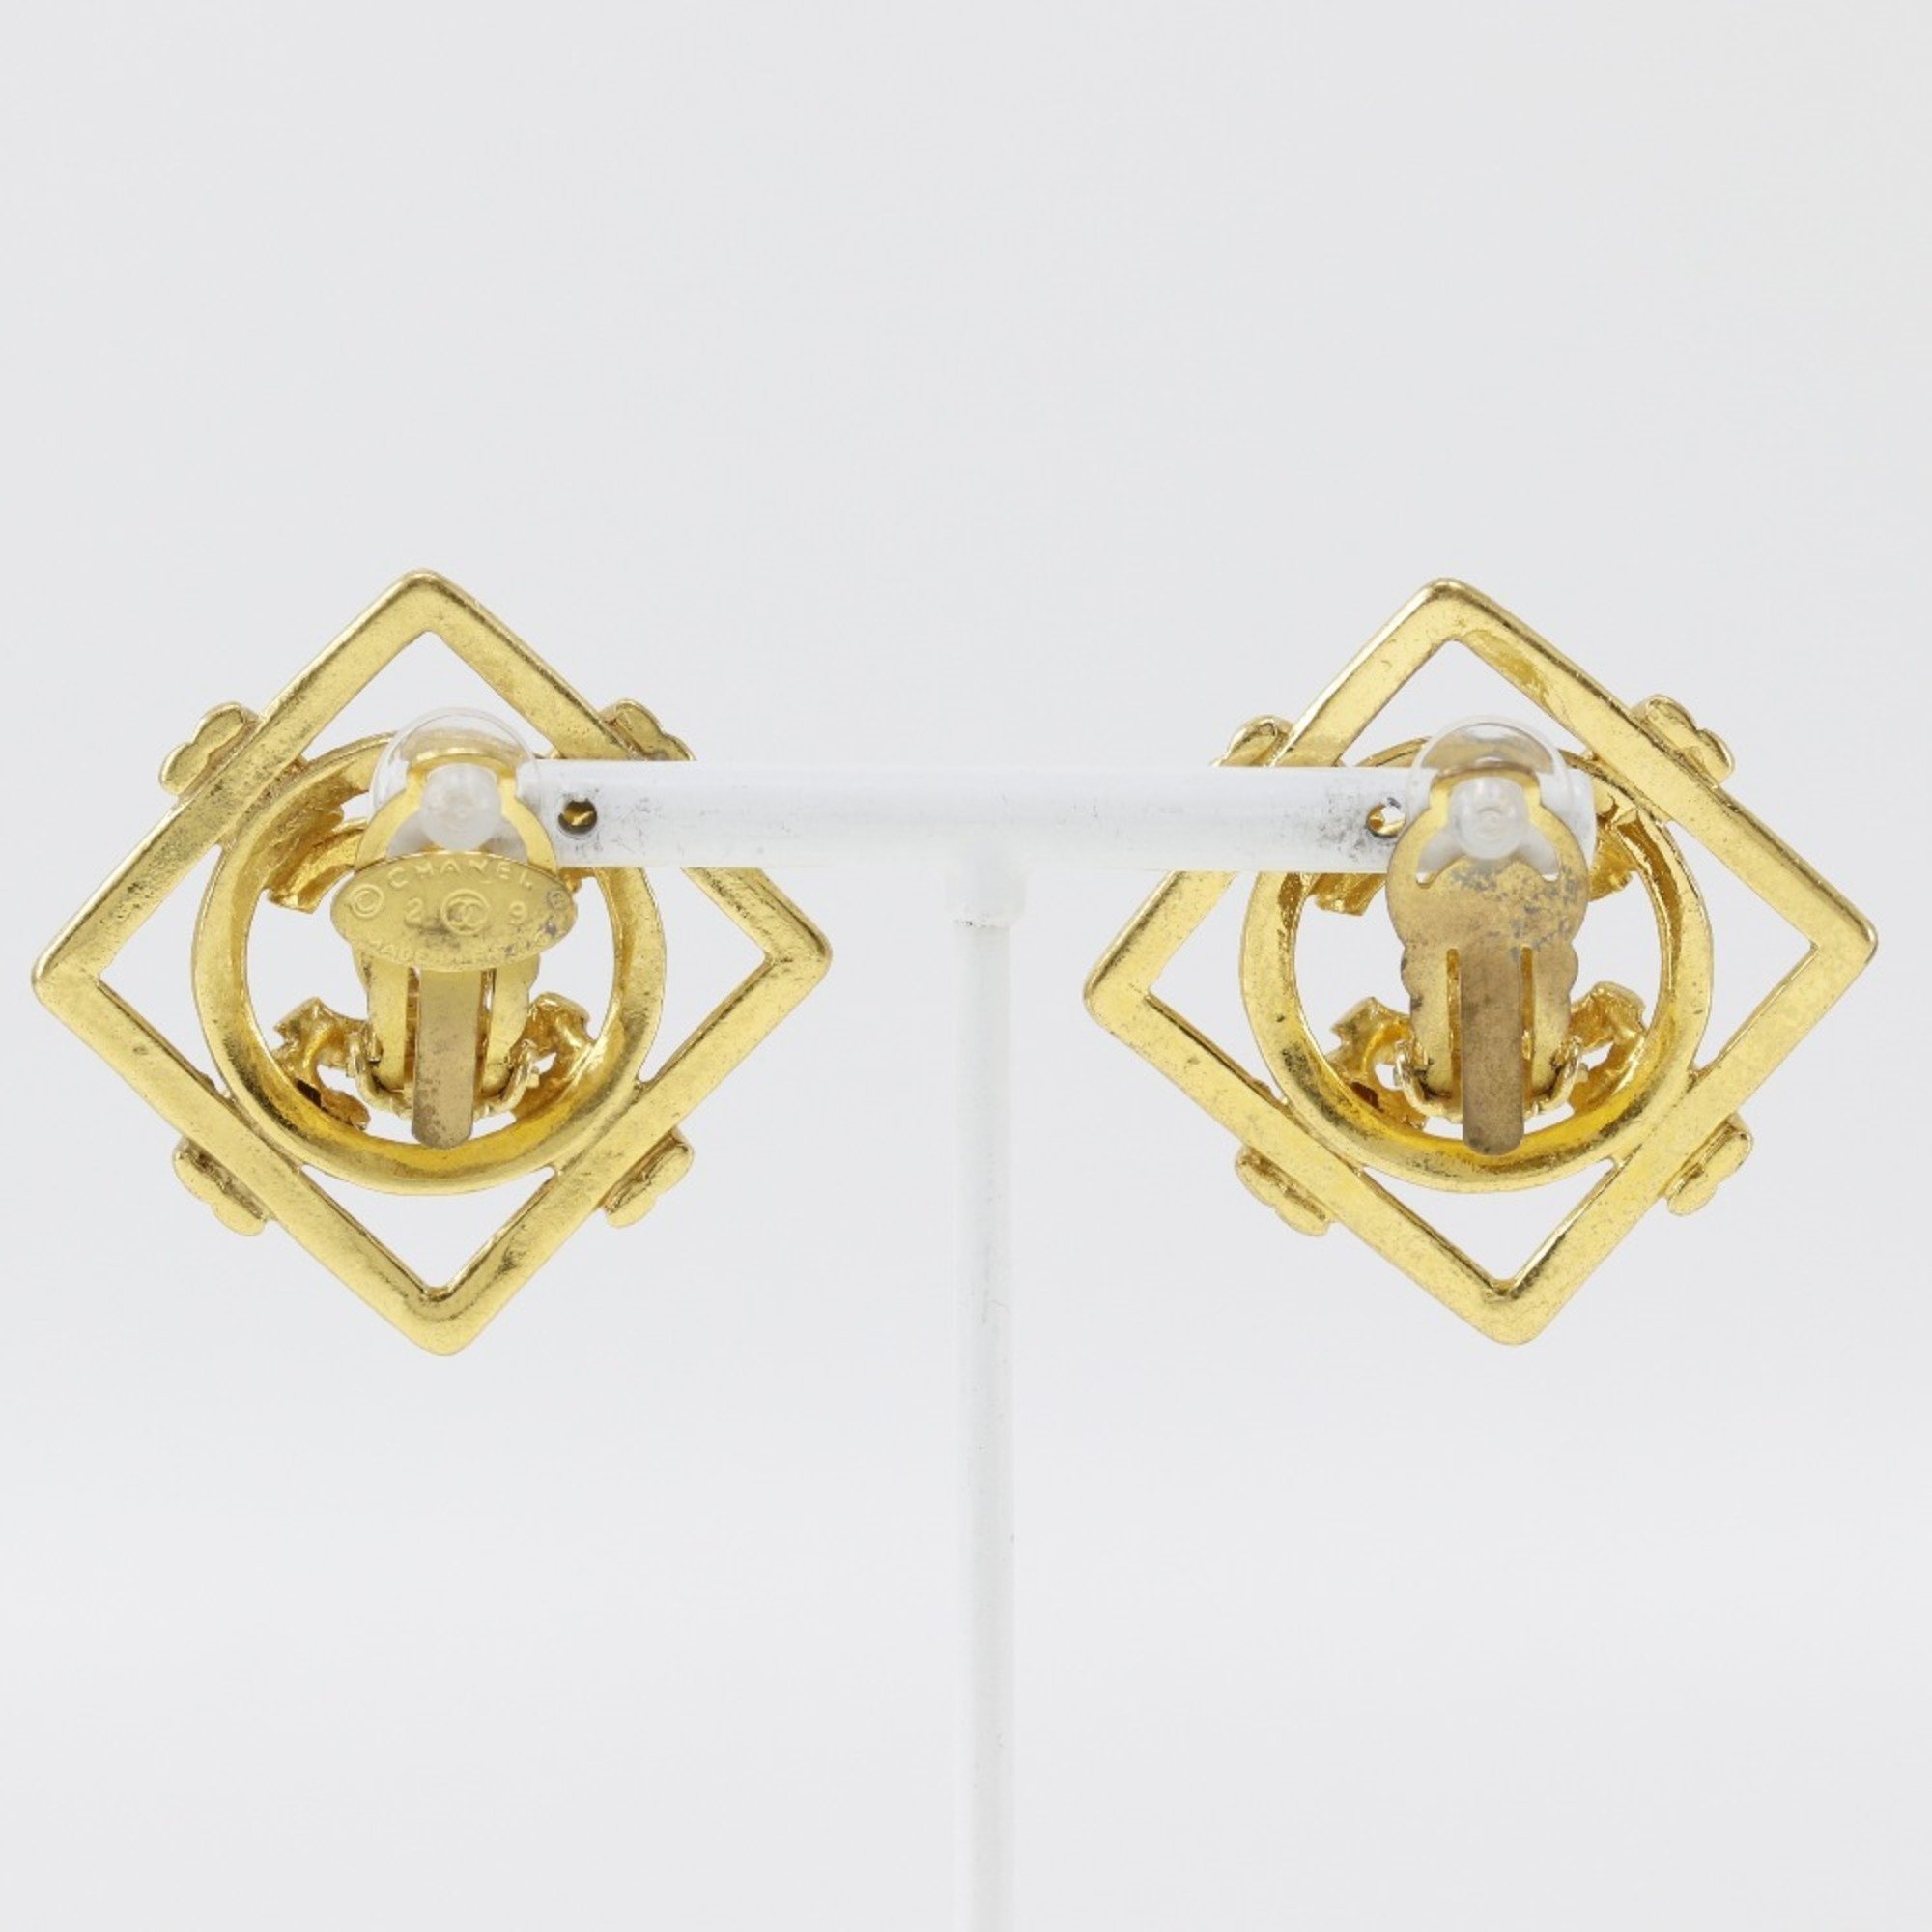 CHANEL earrings gold plated 29 approximately 18.7g ladies I111624069